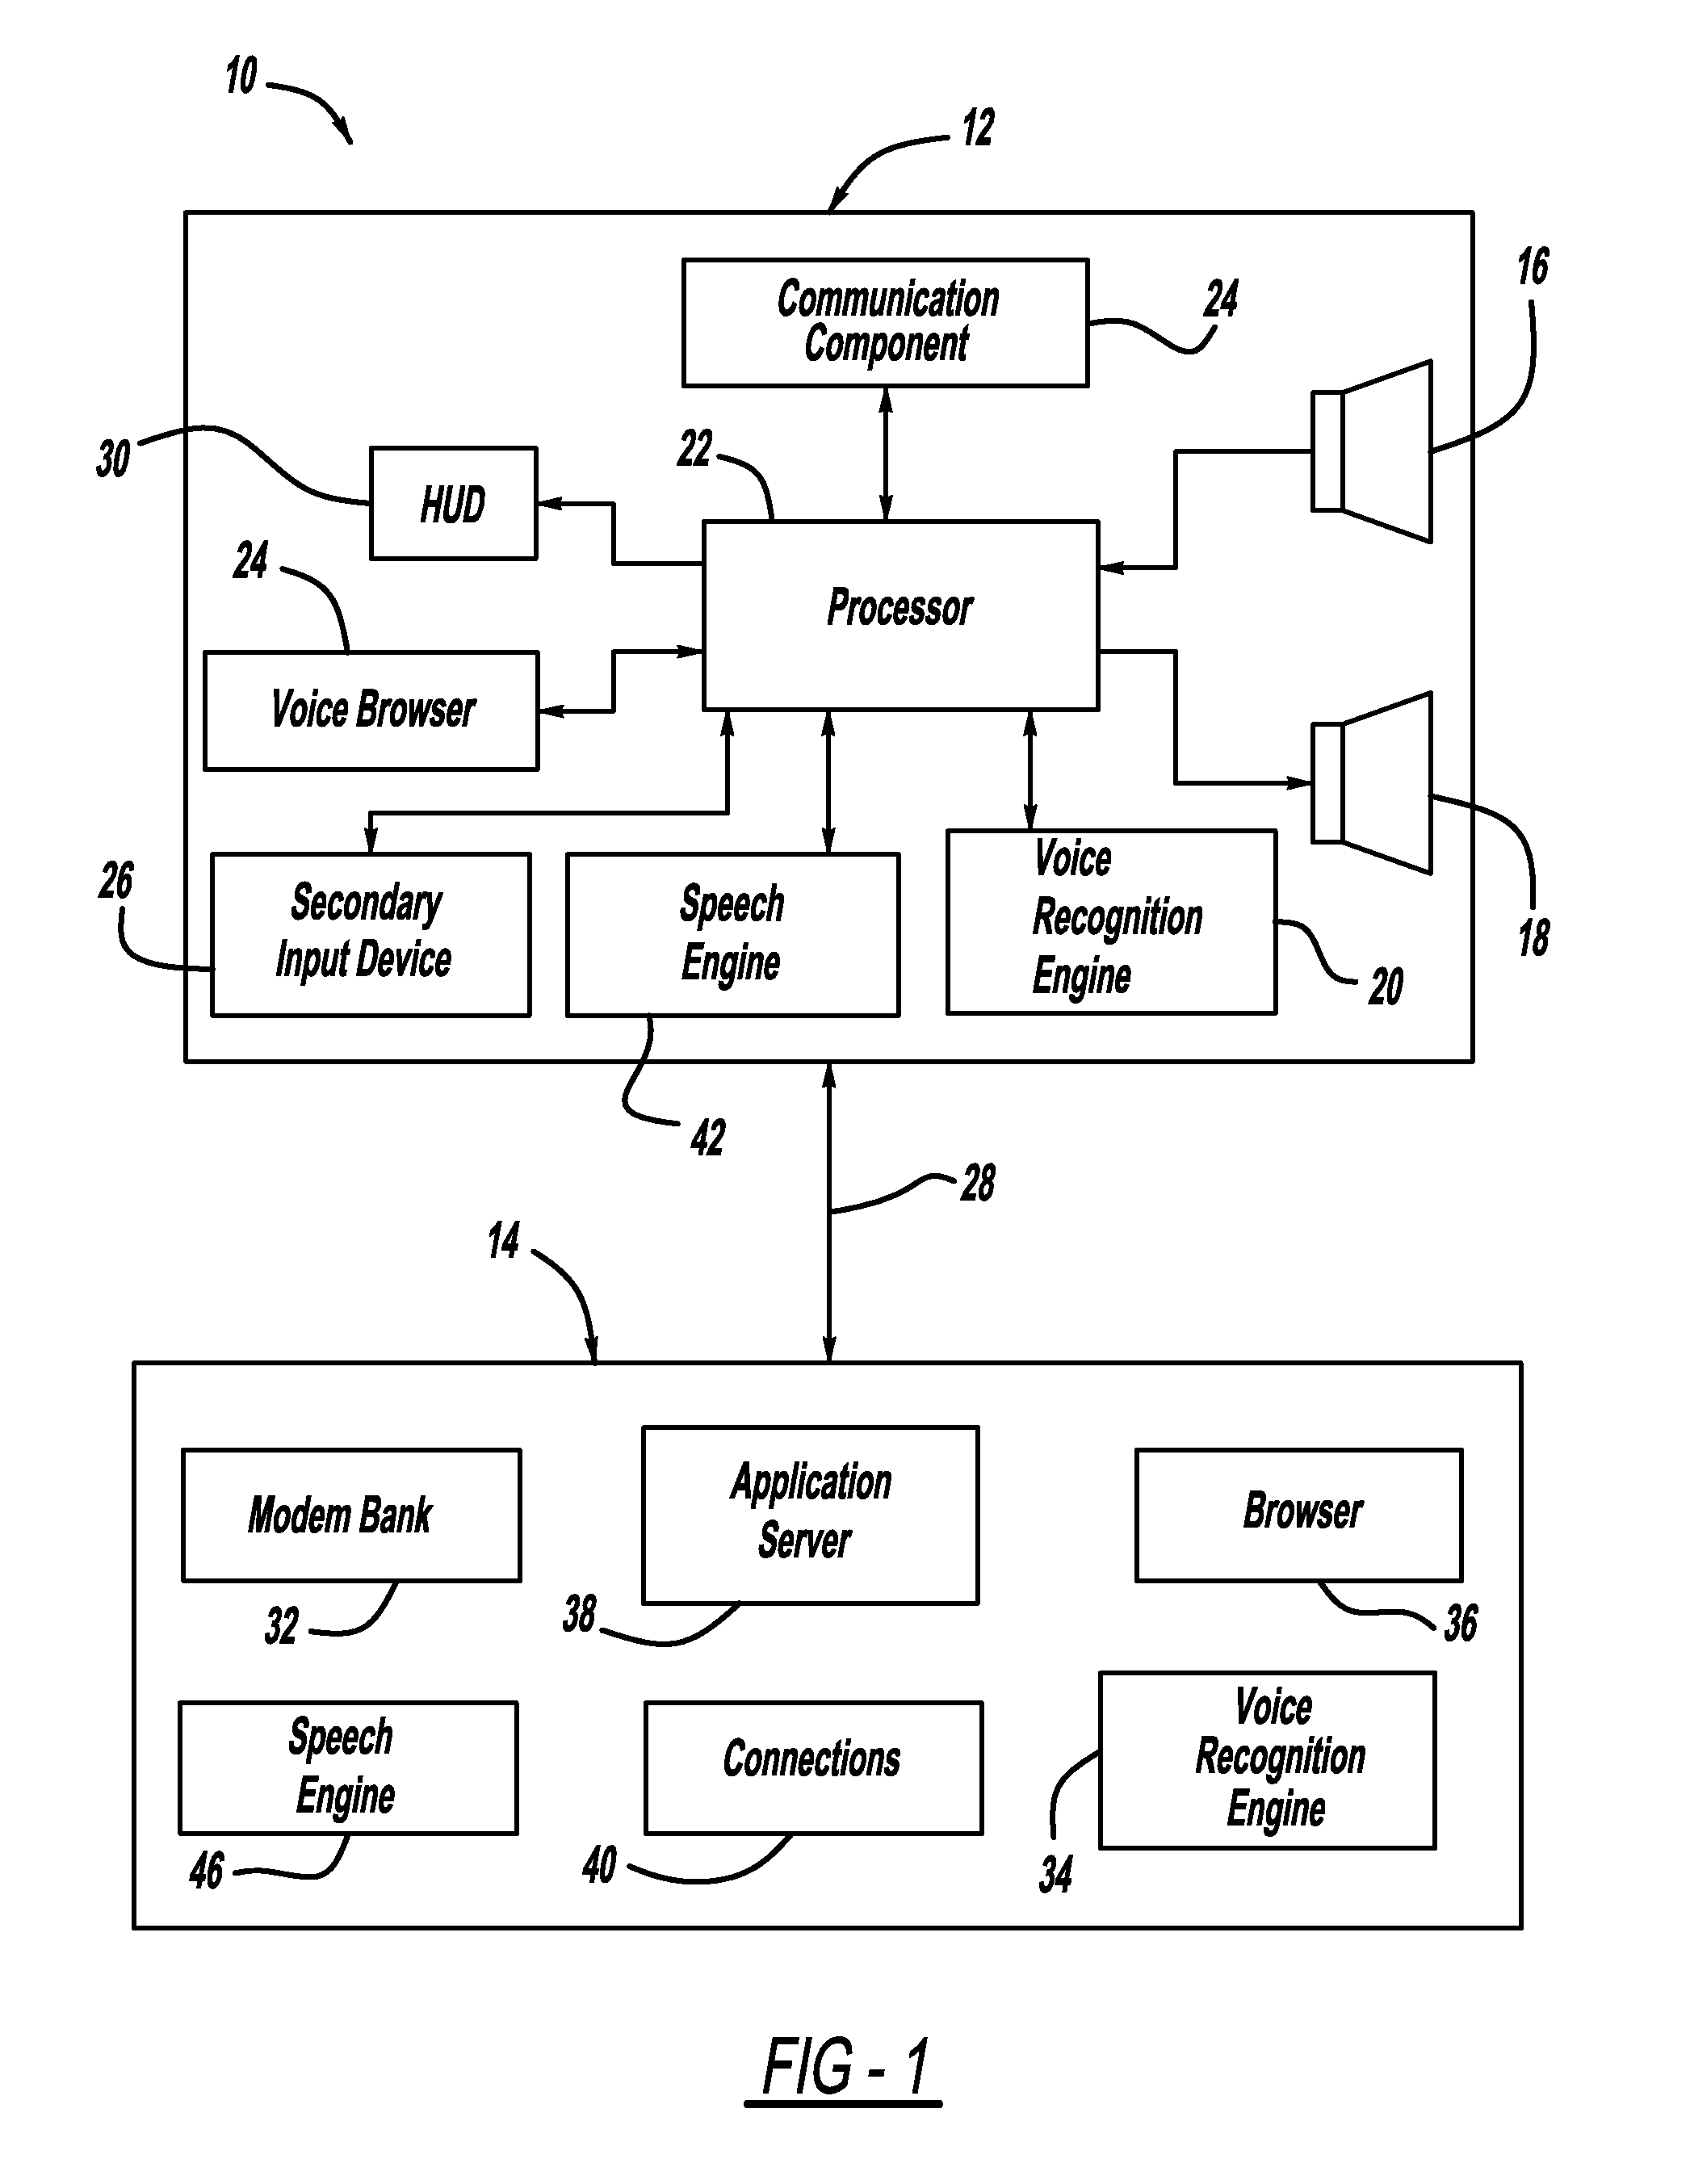 Multi-modal input system for a voice-based menu and content navigation service